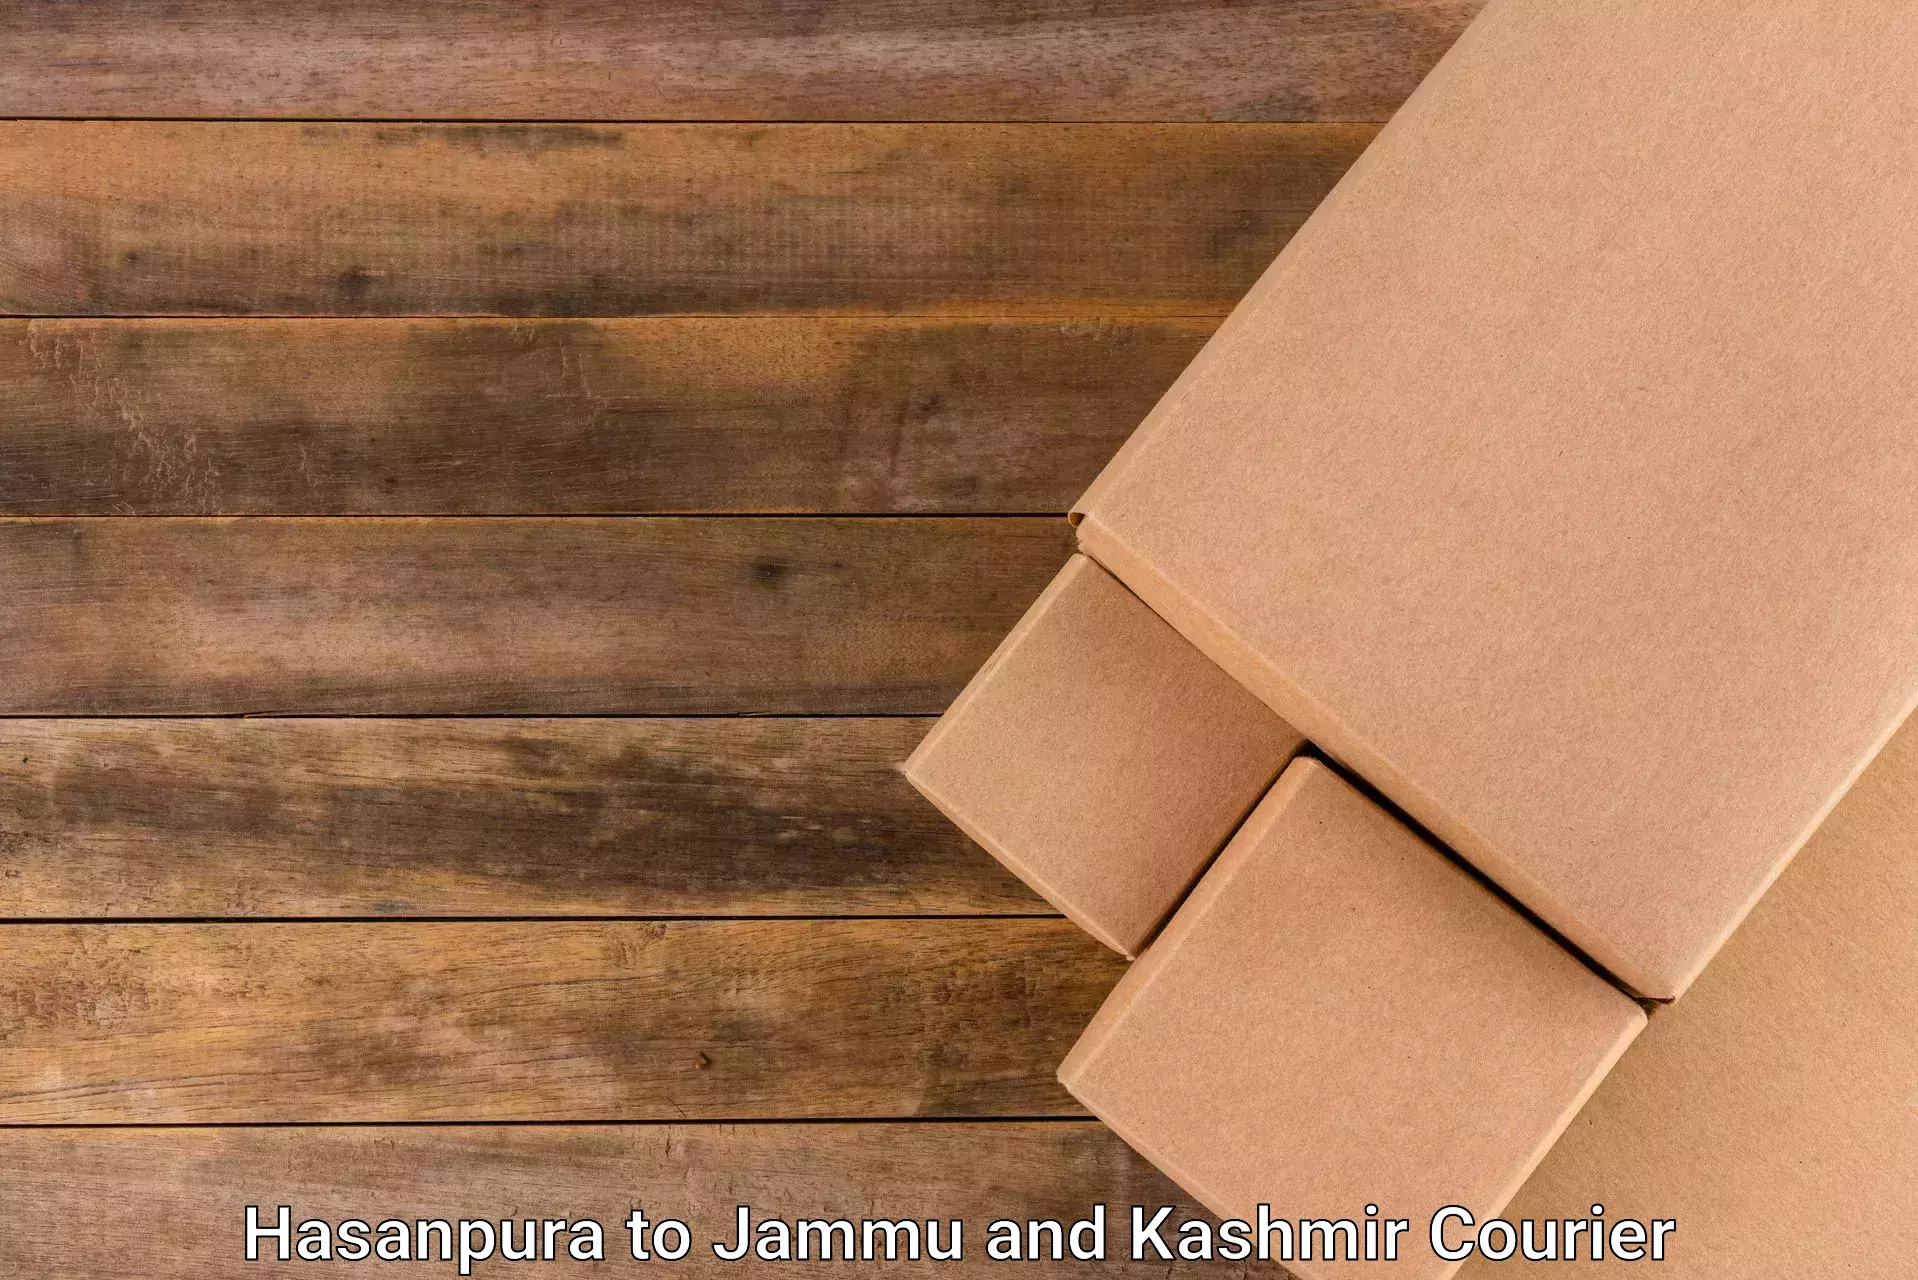 Fast-track shipping solutions Hasanpura to Jammu and Kashmir